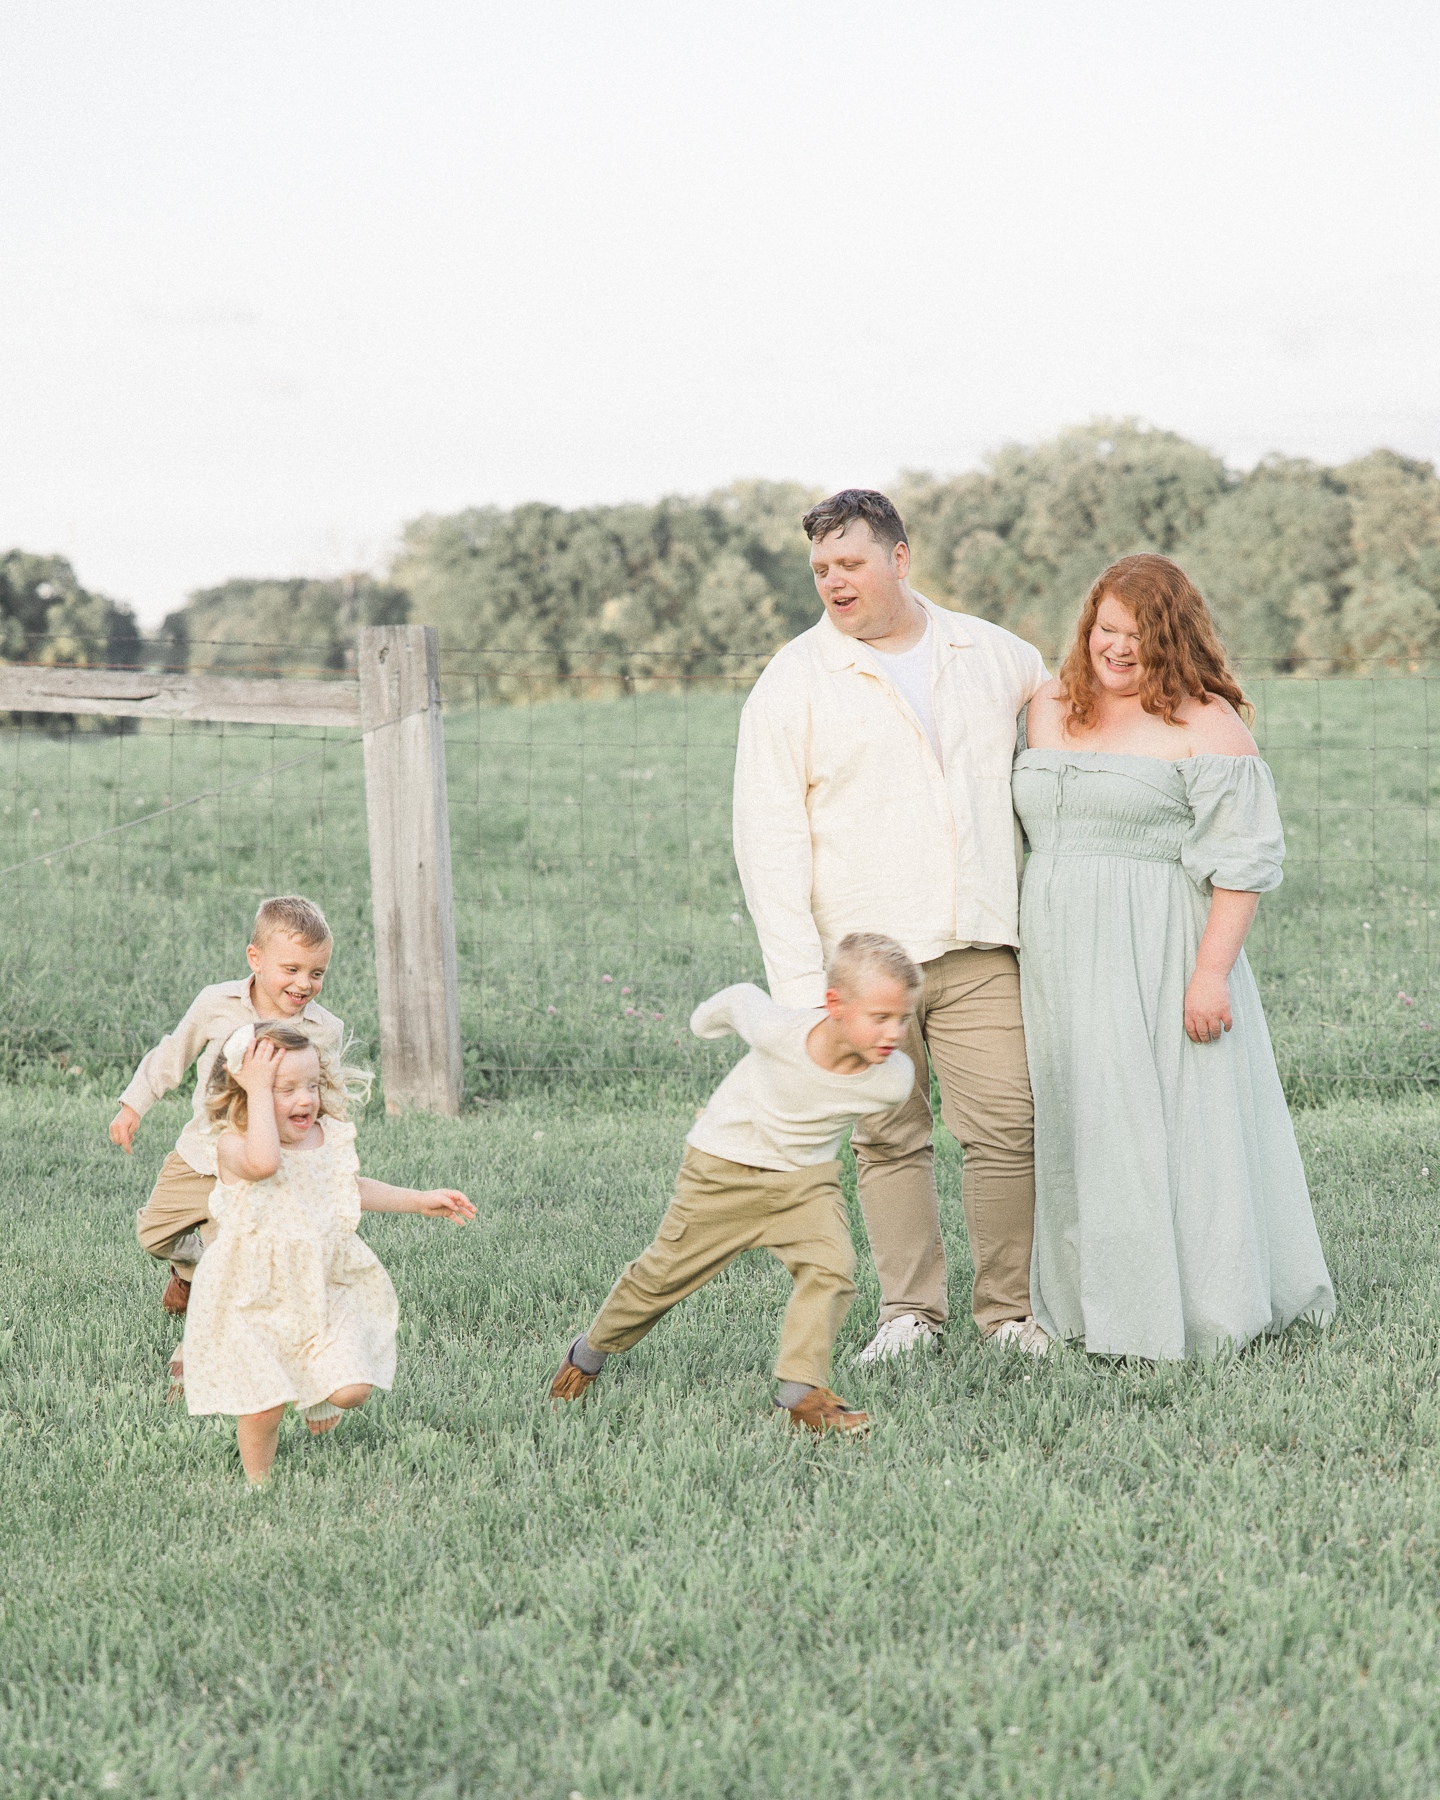 Mother and father stand together as their three young children run around them in a grassy field at Trader's Point creamery indianapolis baby shower venues